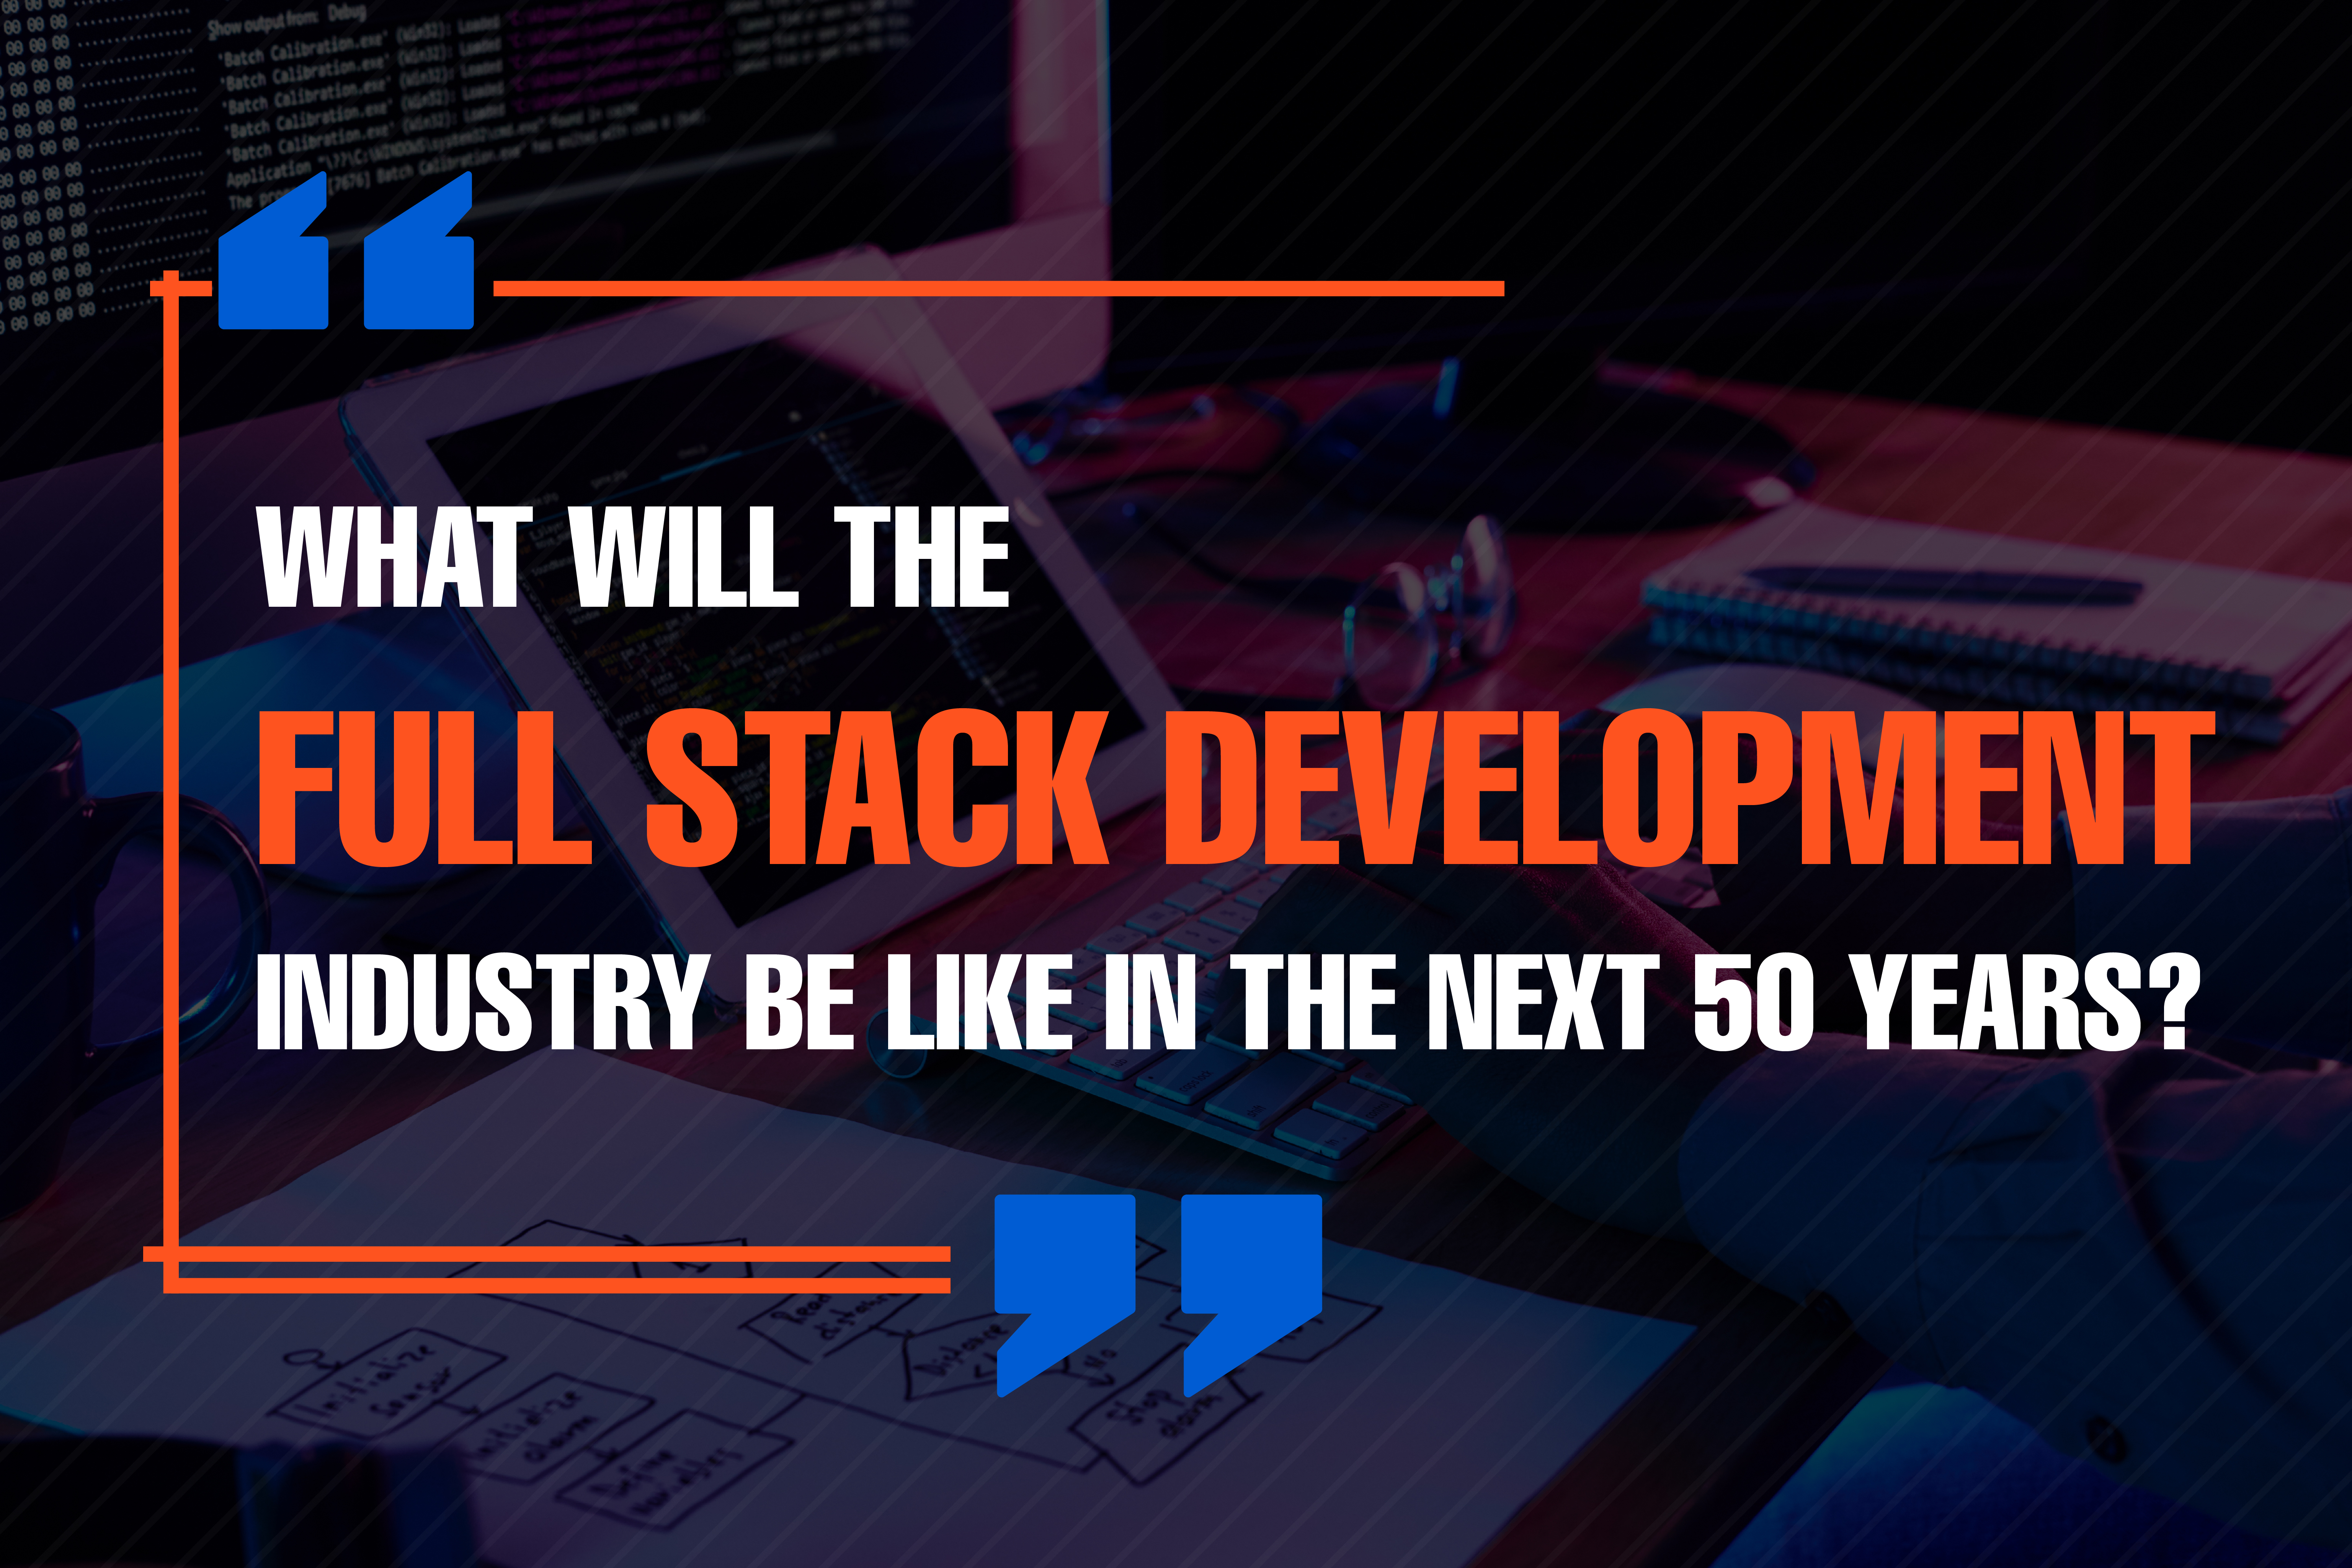 What will The Full Stack Development Industry be Like in the Next 50 Years?